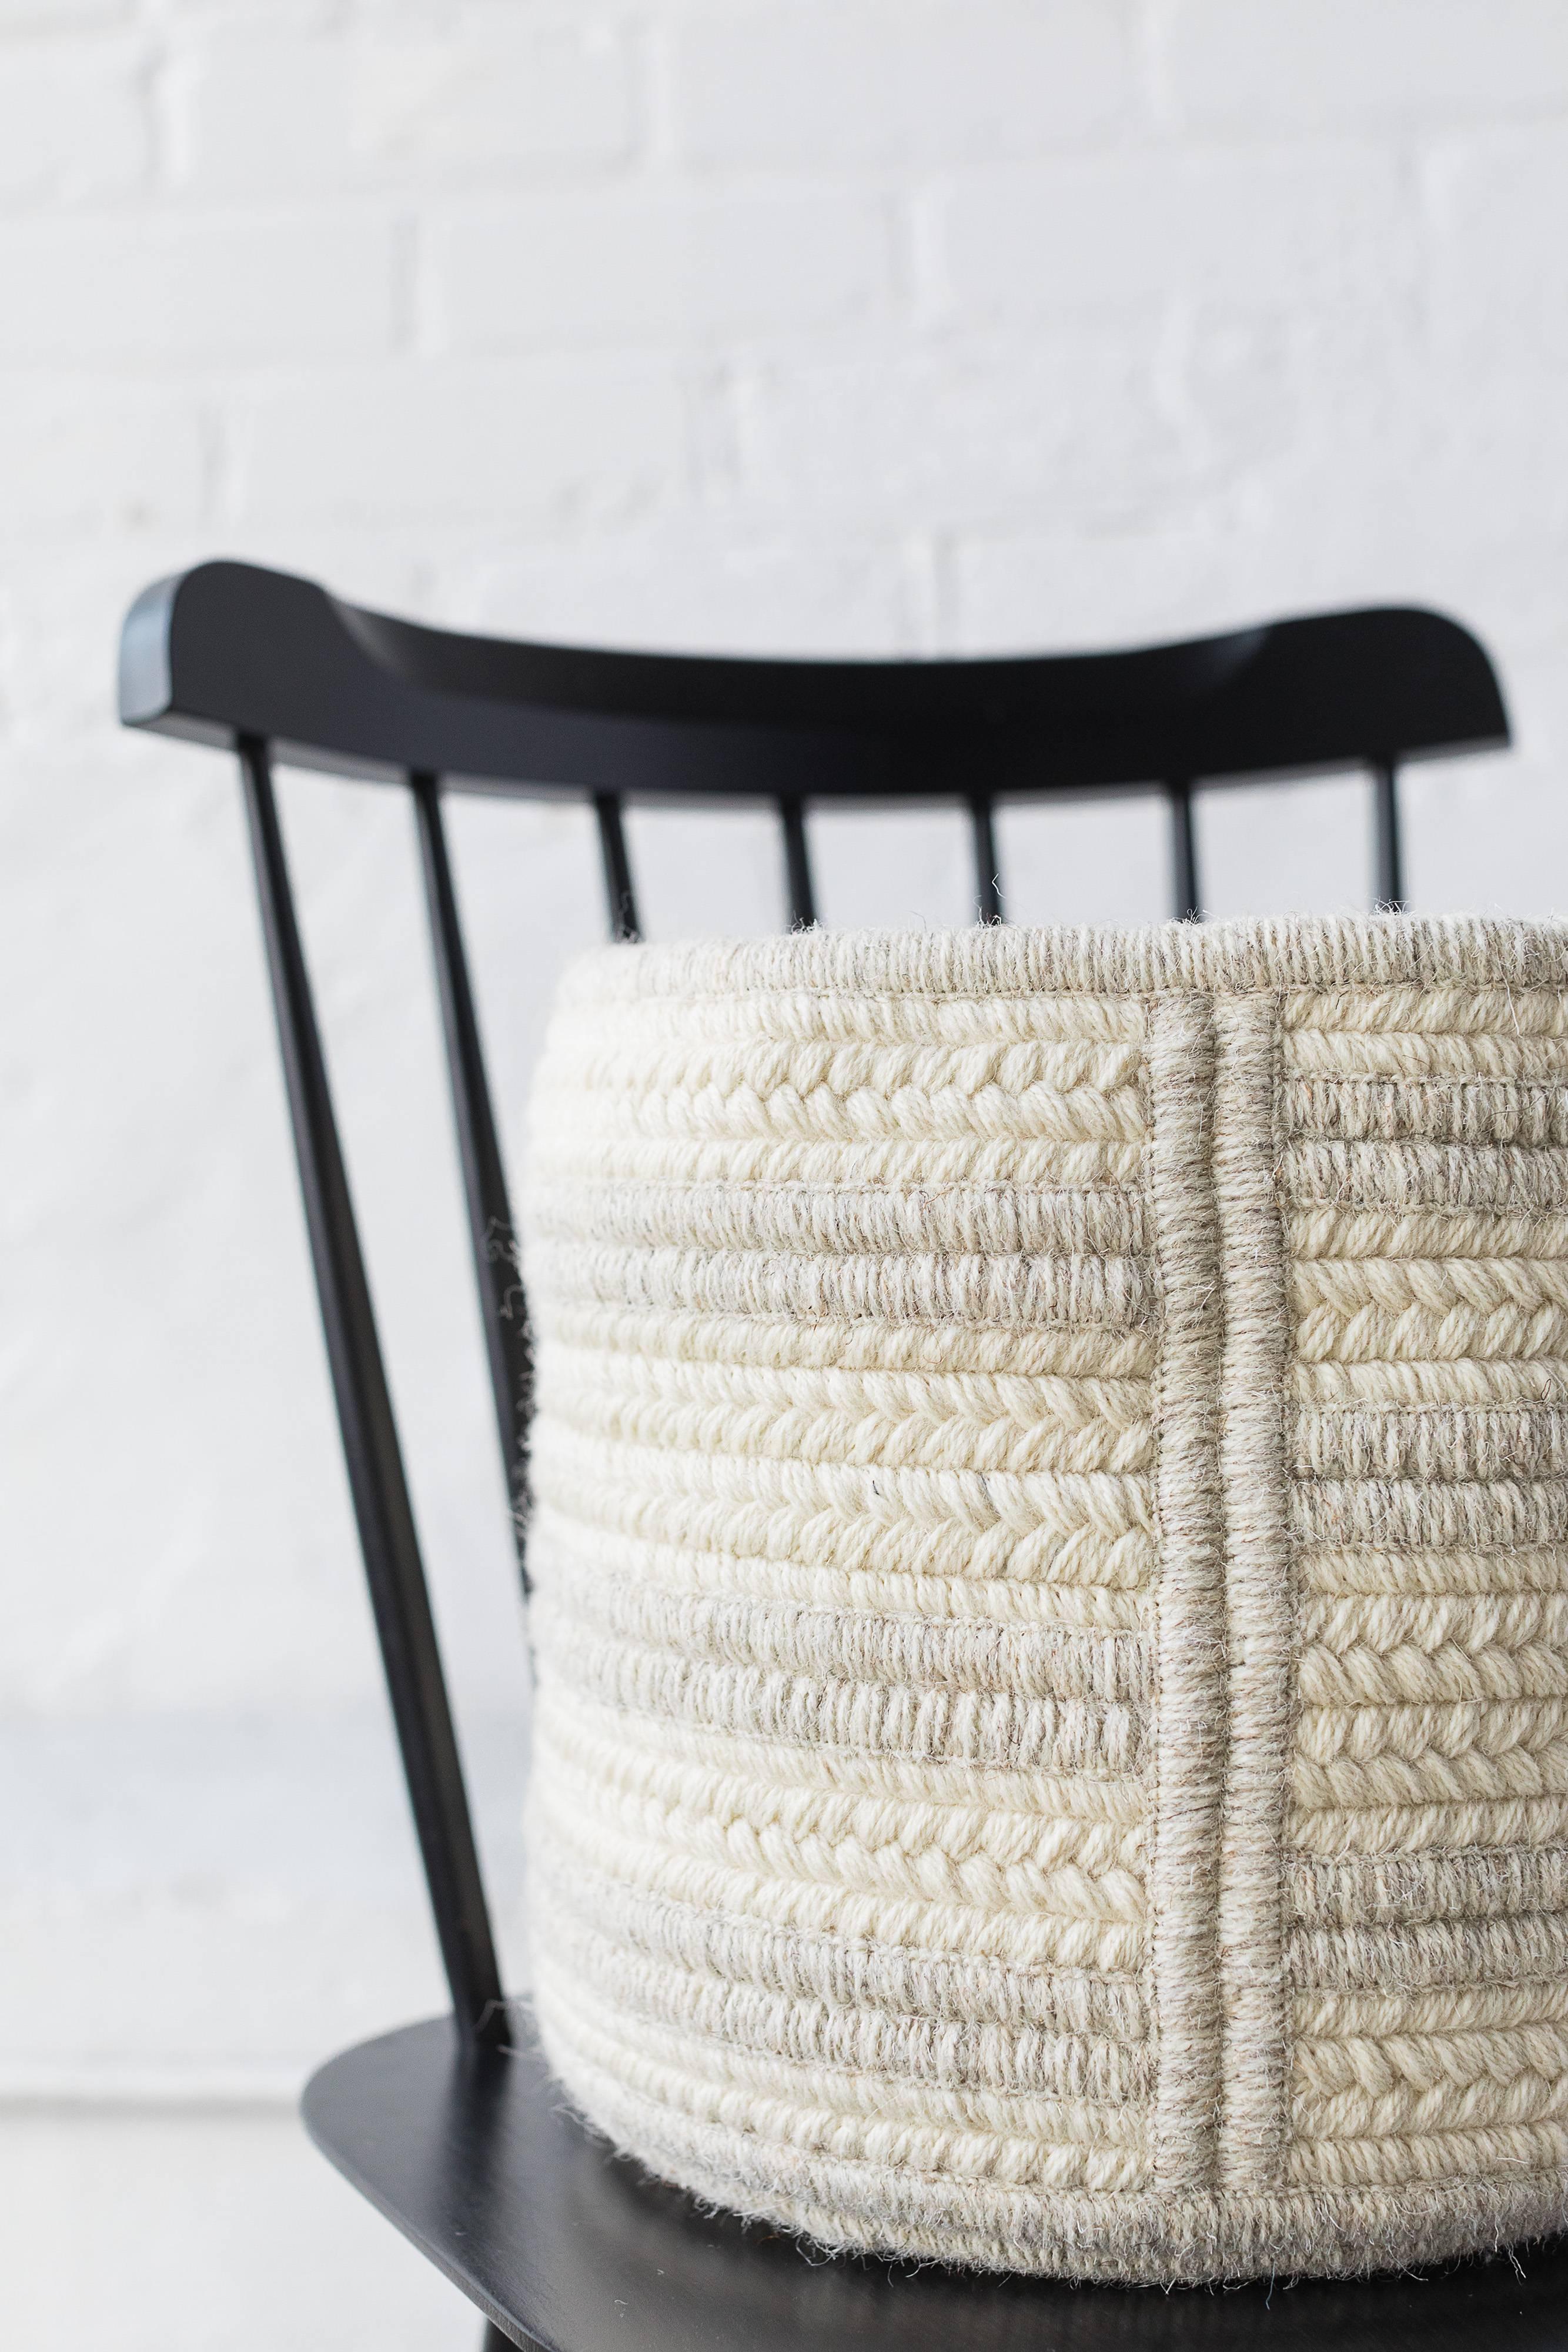 Our Raised Line Basket in Light Grey natural un-dyed woven wool is designed in our Boston studio, and custom made to order in Rhode Island, USA. This basket is soft, yet sturdy and can be used to hold shoes, books, throws or laundry. This listing is